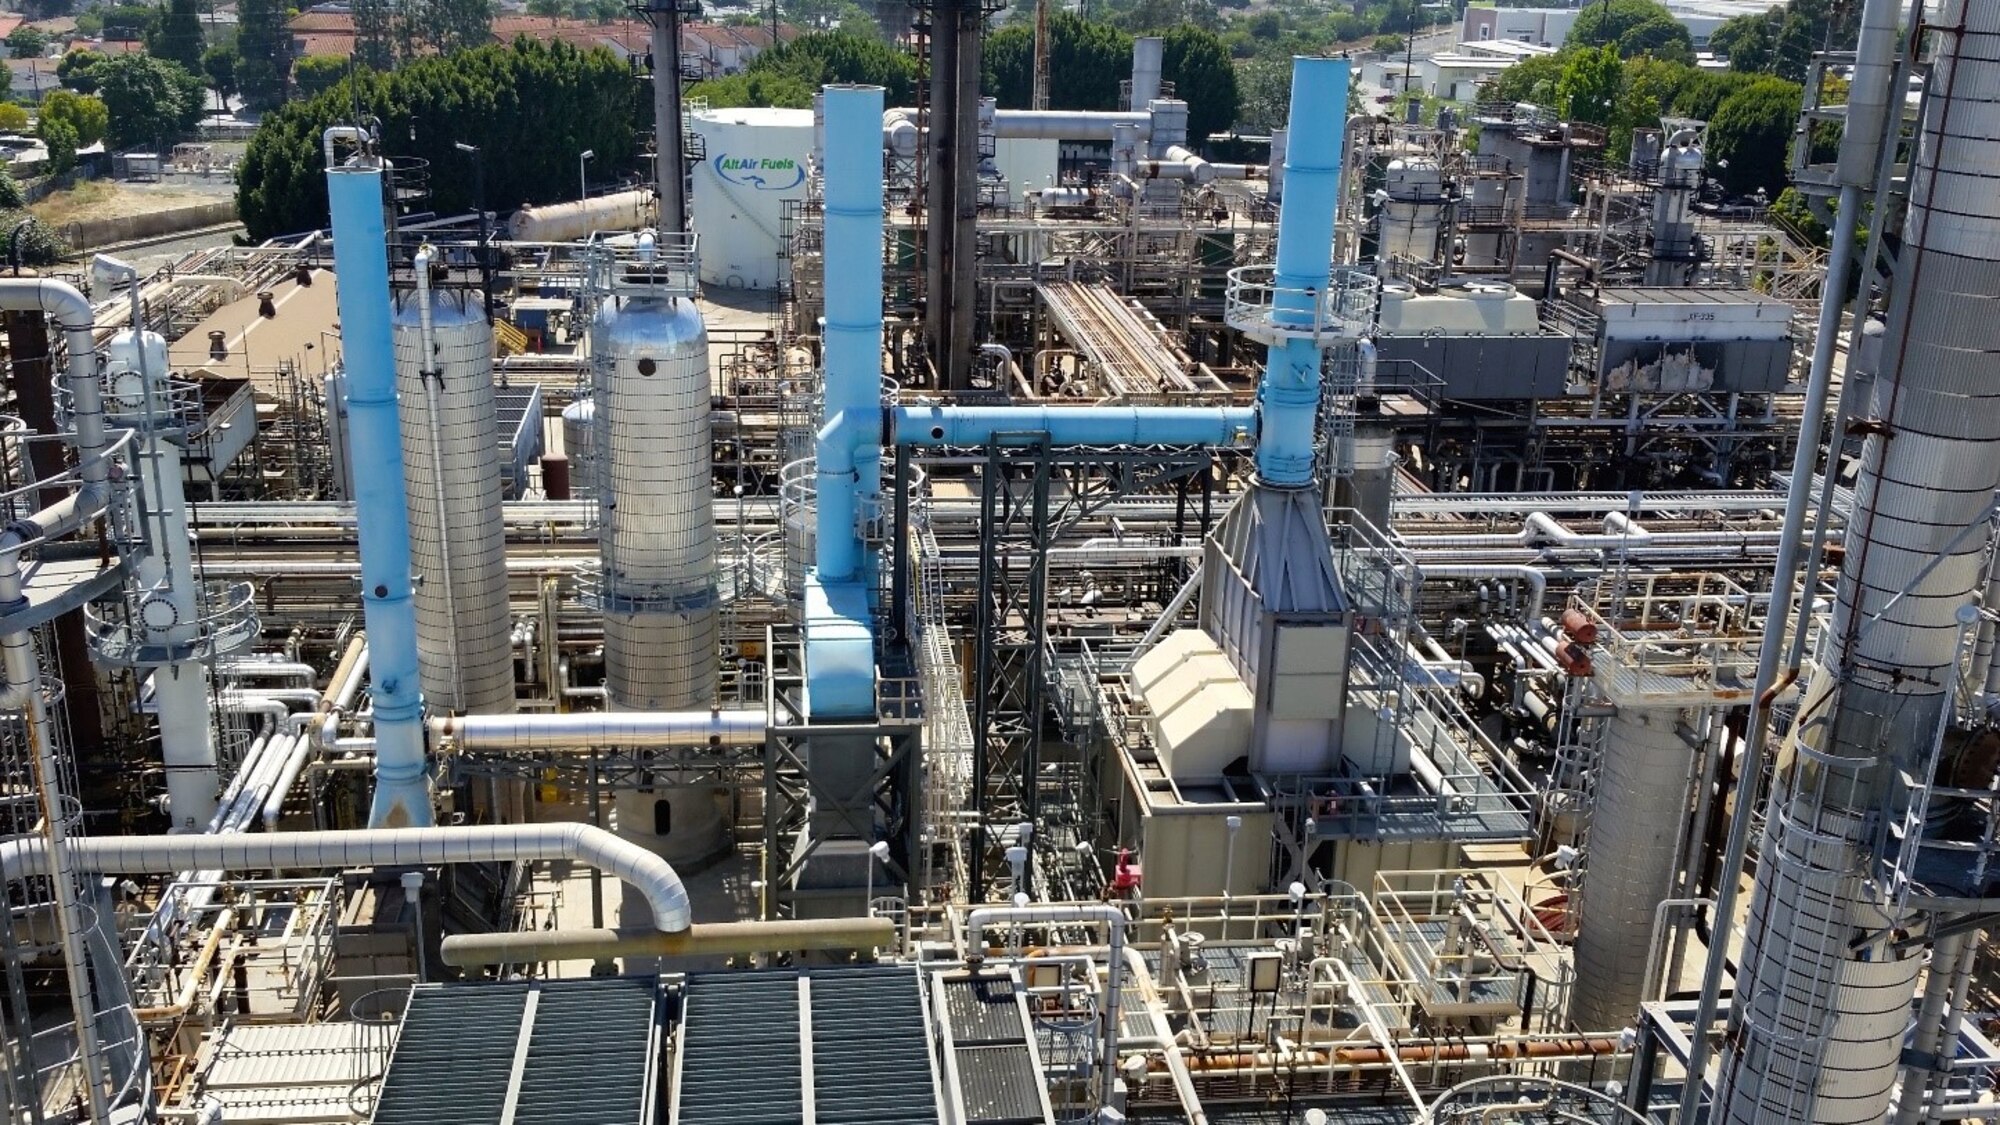 Bird’s eye view of AltAir’s Bio-Synthetic Paraffinic Kerosene Refinery in Paramount, California. Title III involvement was instrumental in advancing the manufacturing capacity for Bio-Synthetic Paraffinic Kerosene biofuel blend. (Courtesy photo)